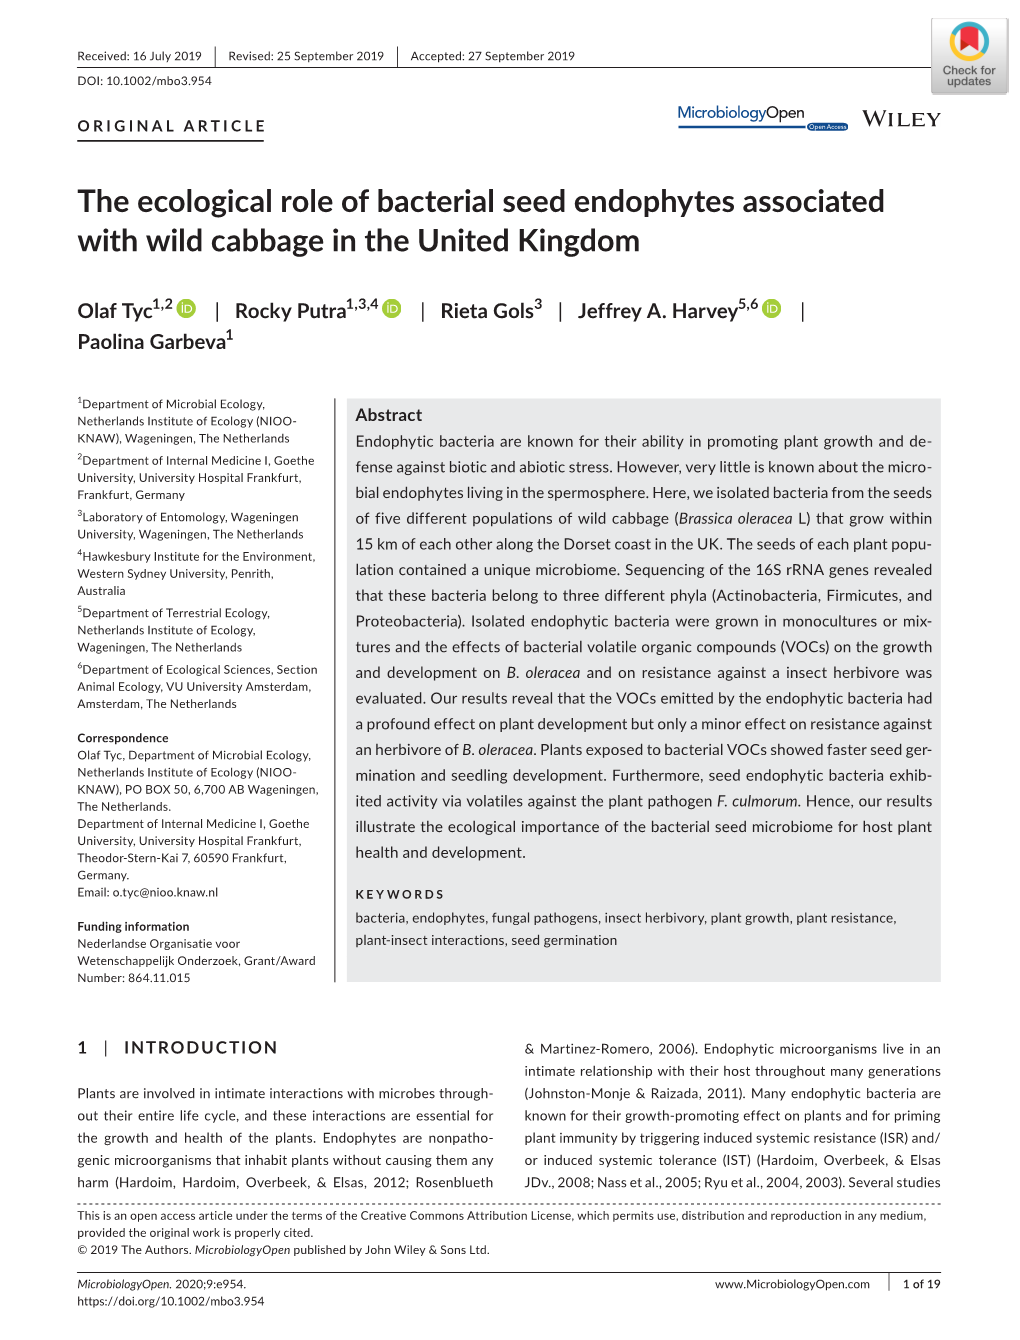 The Ecological Role of Bacterial Seed Endophytes Associated with Wild Cabbage in the United Kingdom